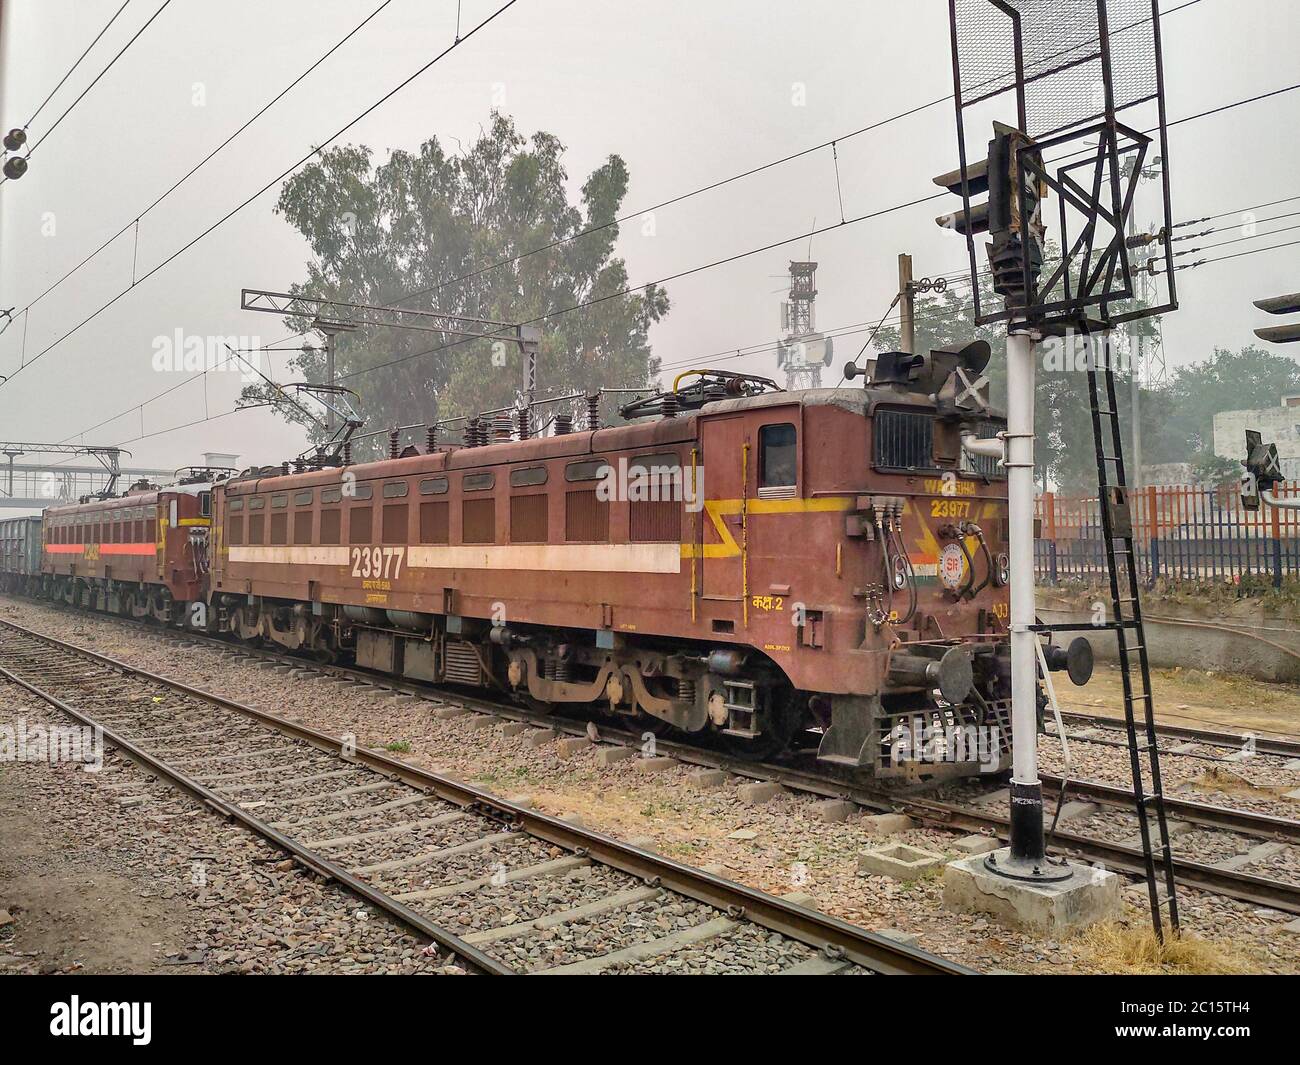 Editorial. Dated-18th April 2020, location - New Delhi.An Indian Frieght train. A forward view of outside the train door. Stock Photo